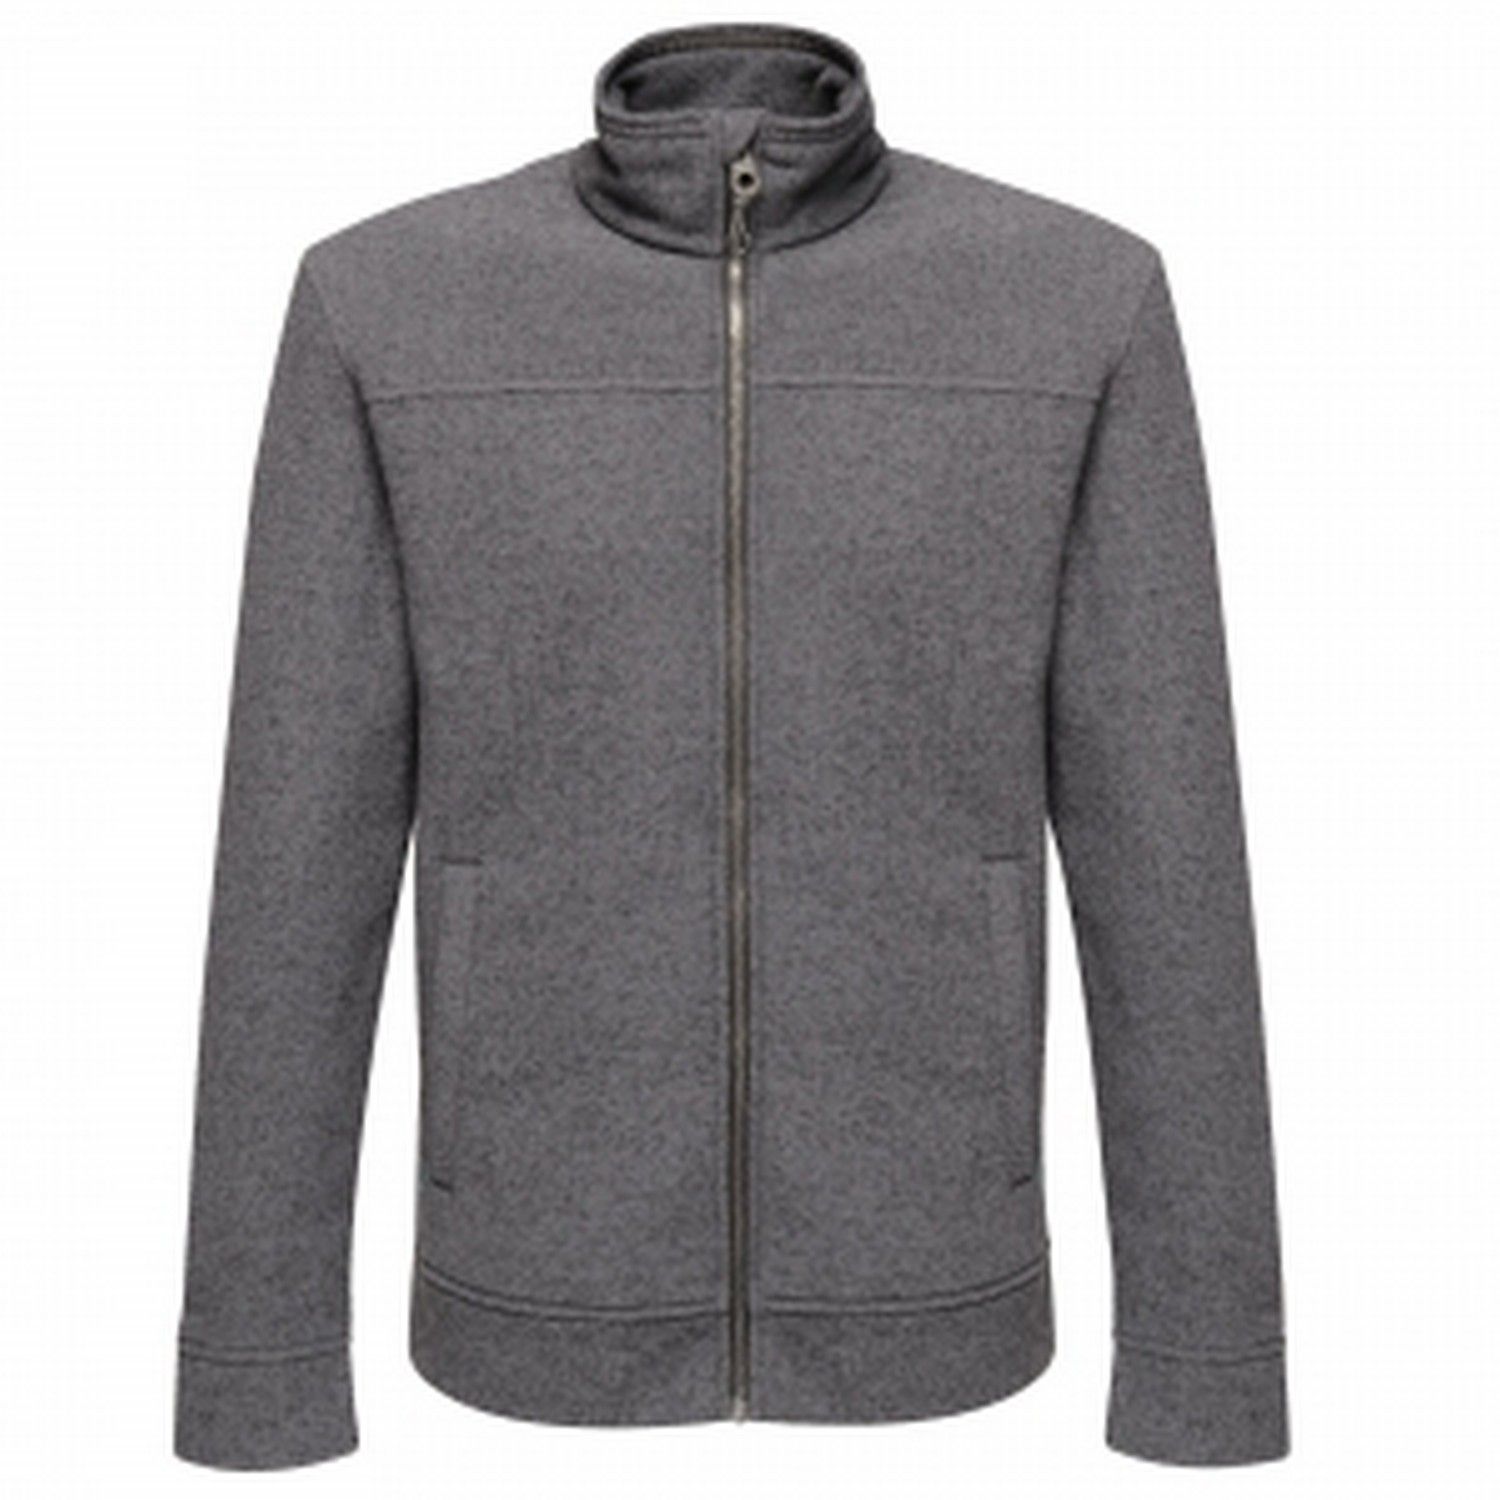 100% Polyester. The Parkline fleece offers the ultimate microlayer. The mens fleece is made with a smart lightweight fabric, providing a great layering option. The lightweight fleece offers a quick-drying function and features a stylish full-zip design and protective chin guard.